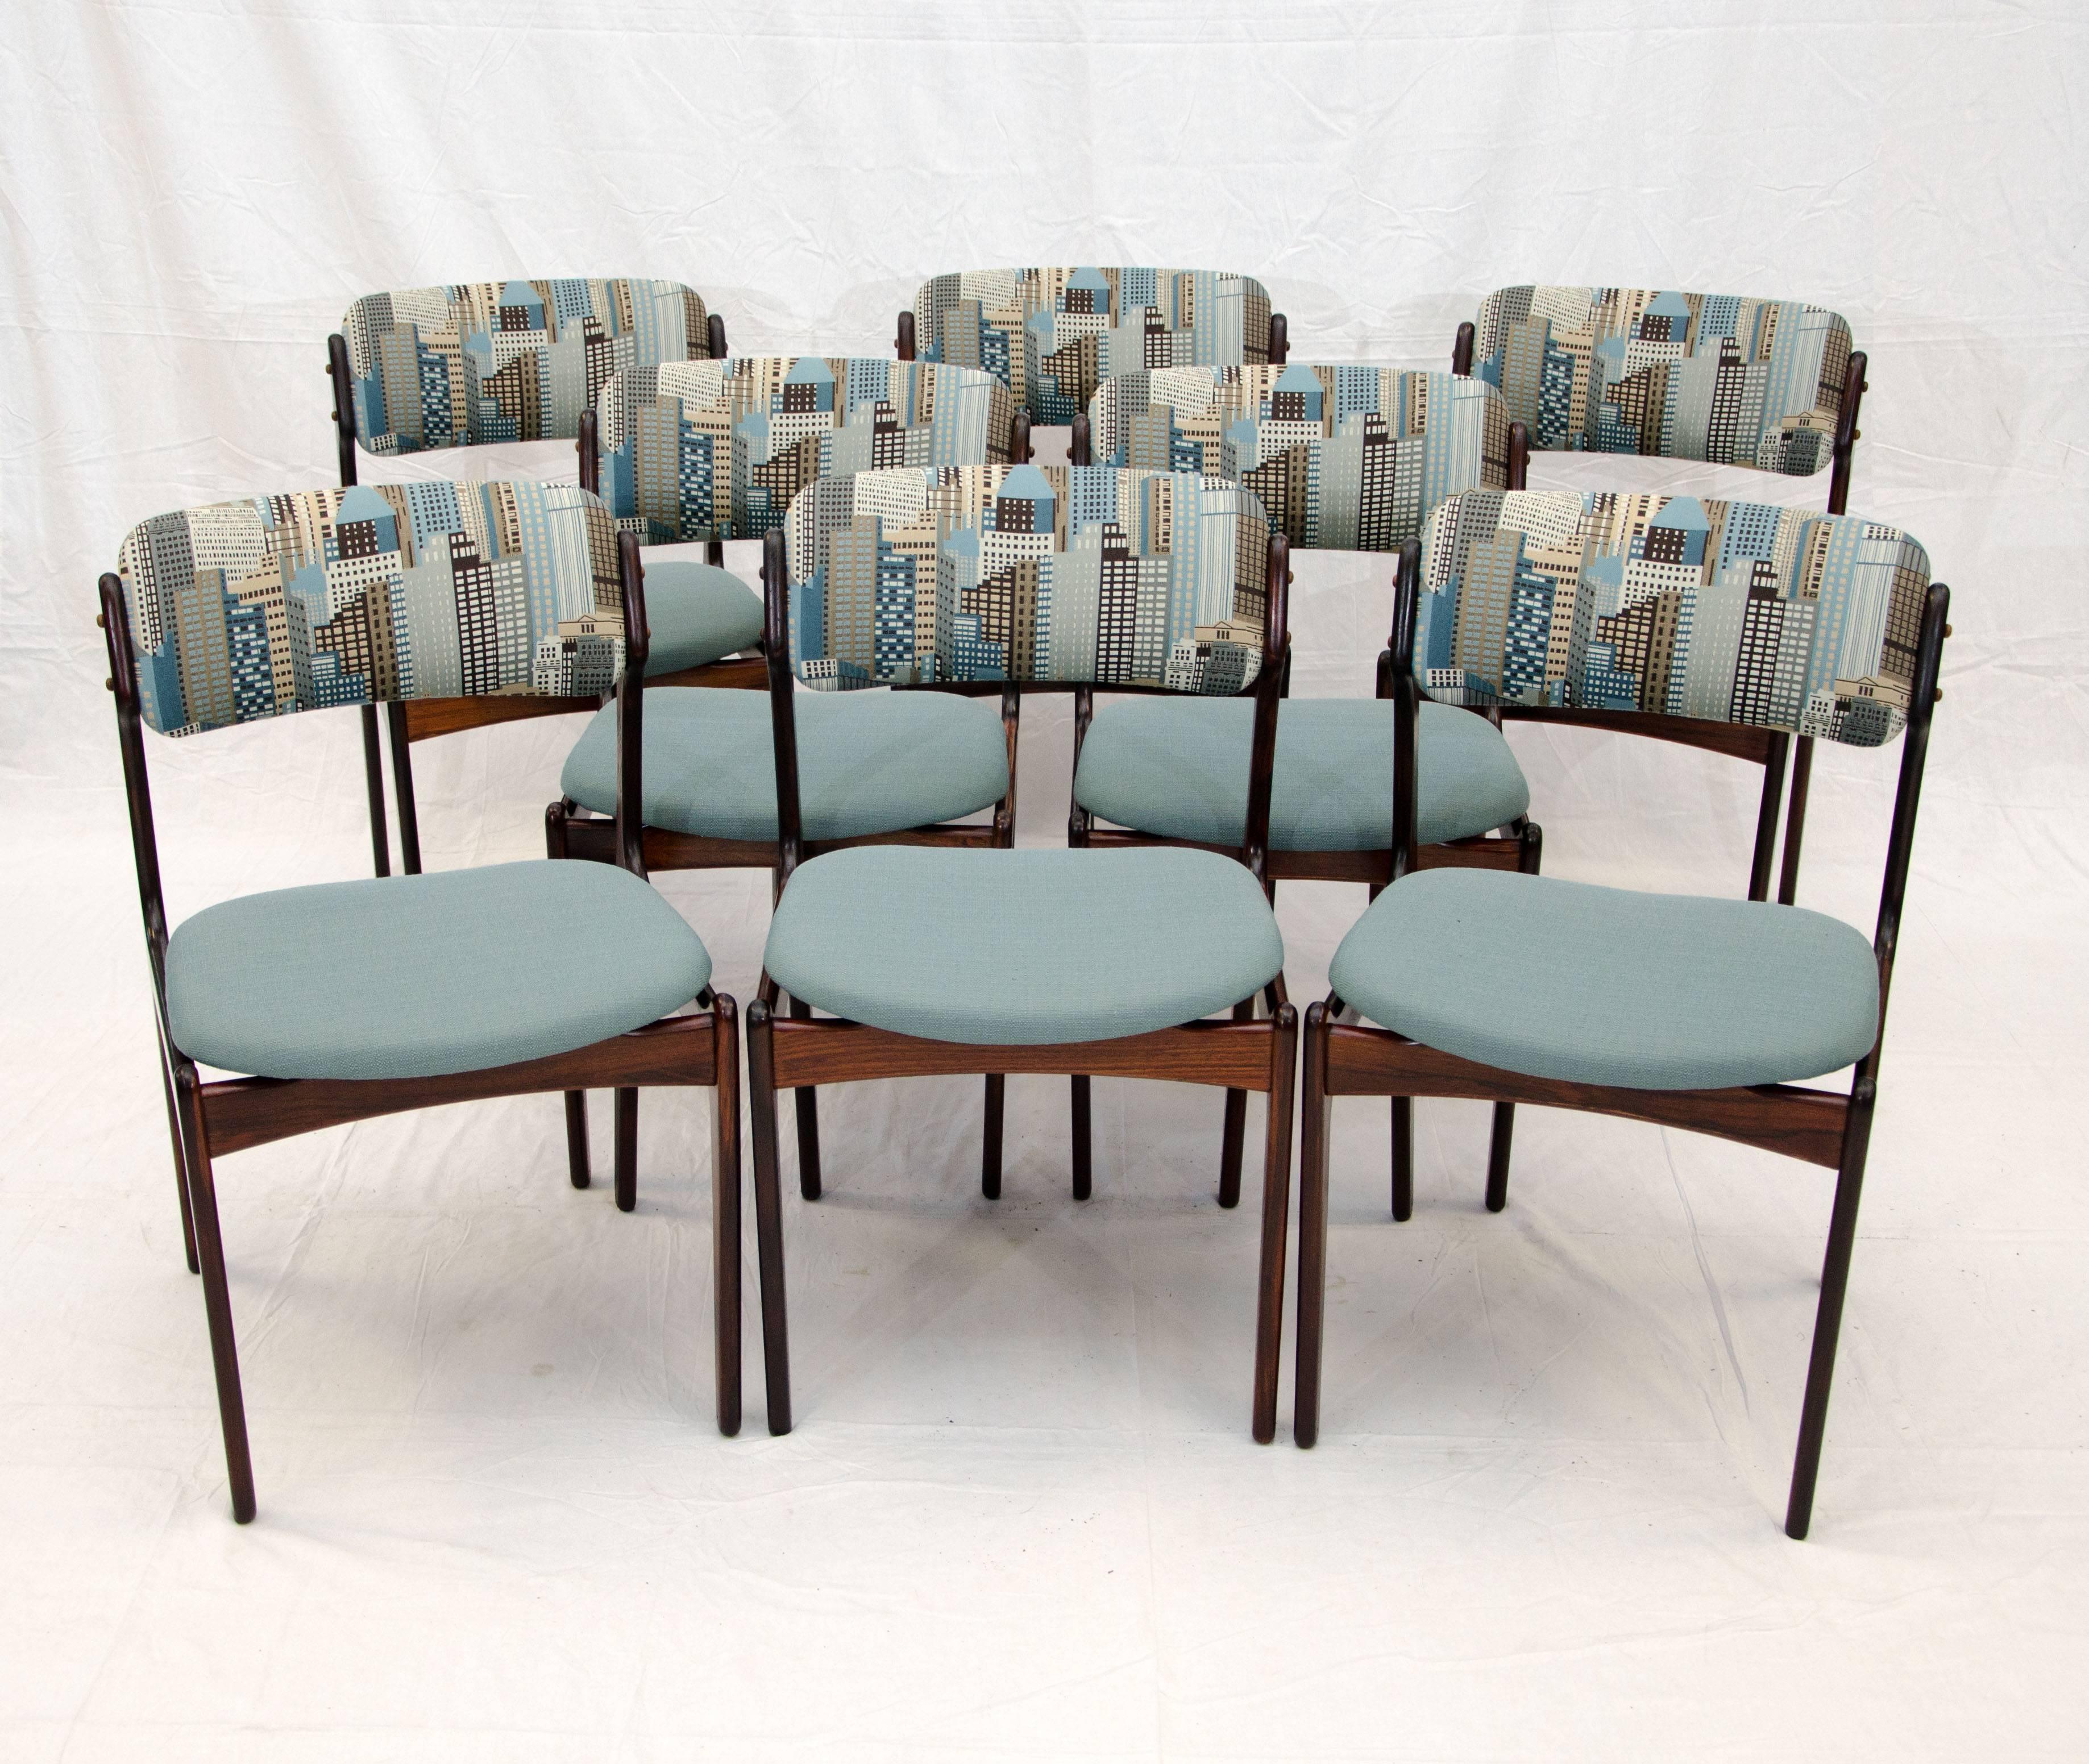 Beautiful set of eight rosewood Erik Buck dining chairs. These chairs are very comfortable with floating seats and curved upholstered backs. The back upholstery is a scene of high rise buildings, possibly inspired by New York City.